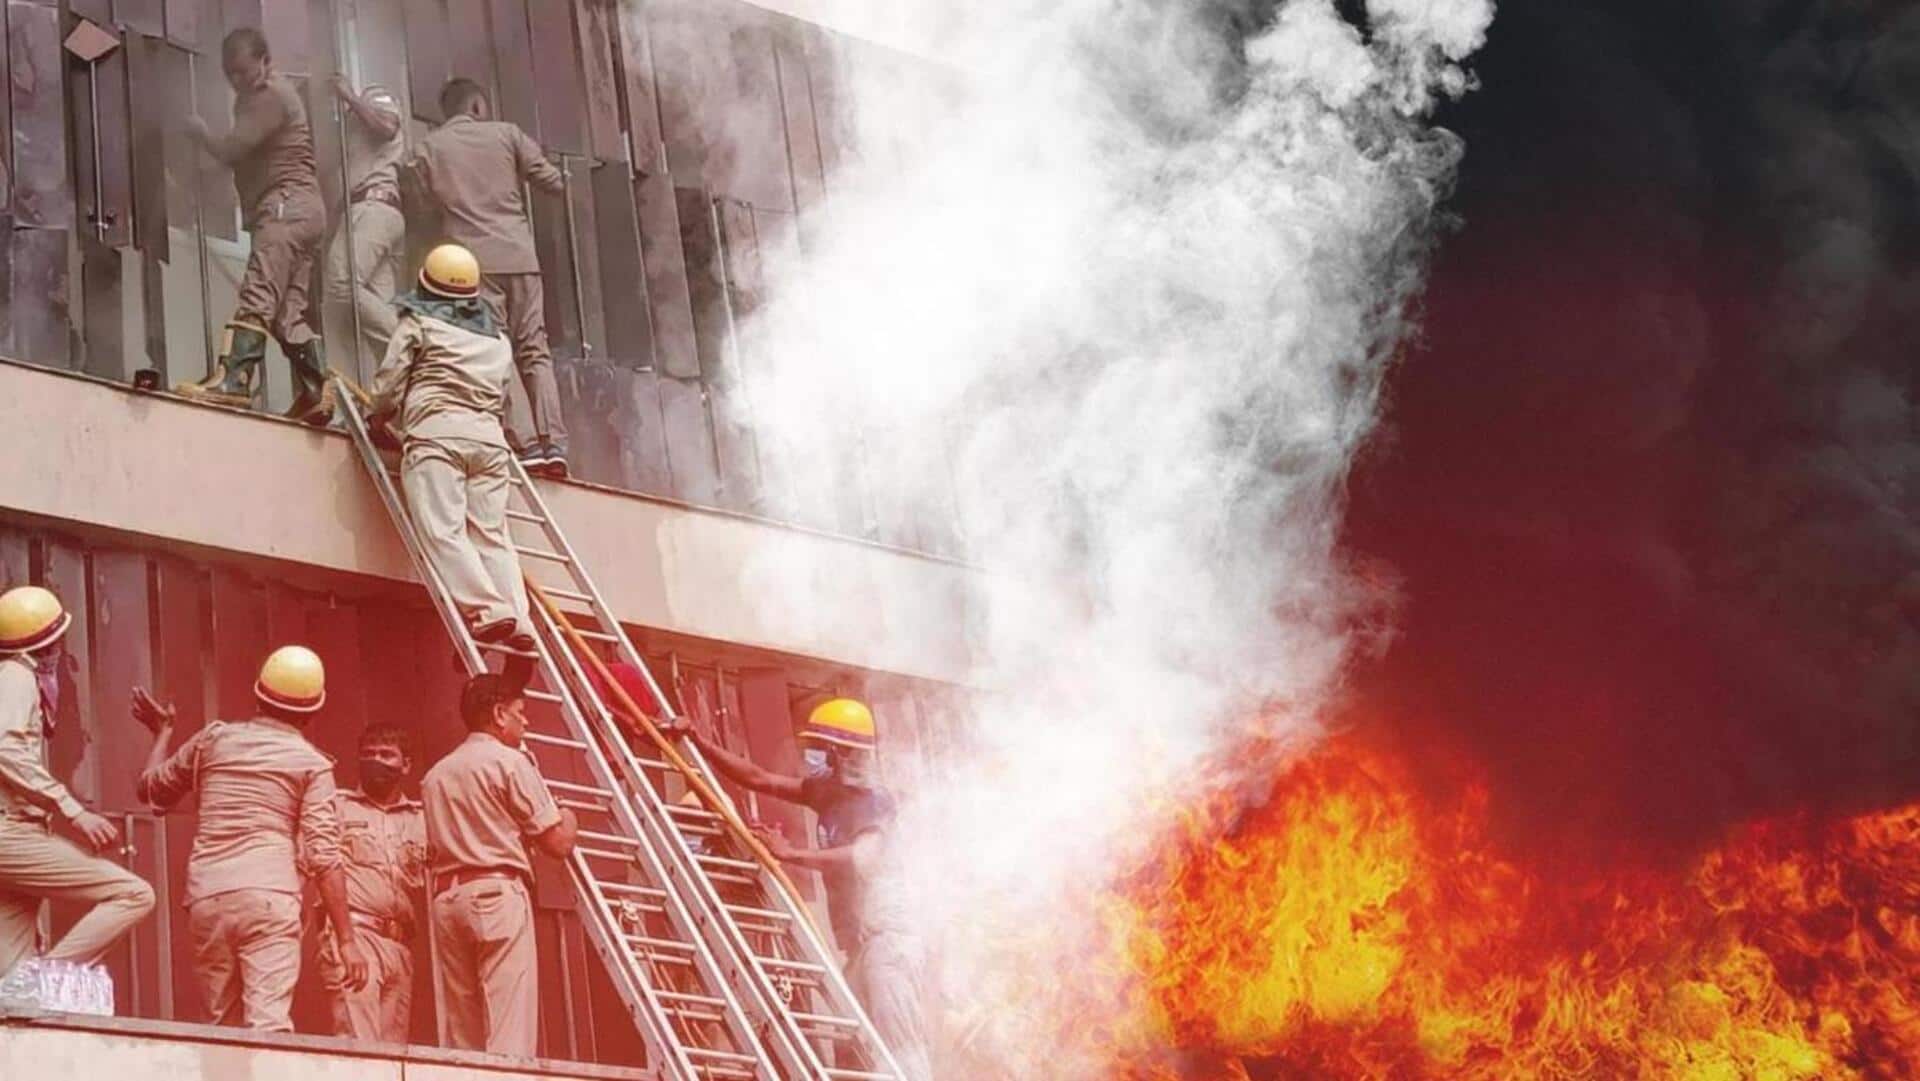 Surat factory fire: Charred bodies of 7 workers recovered